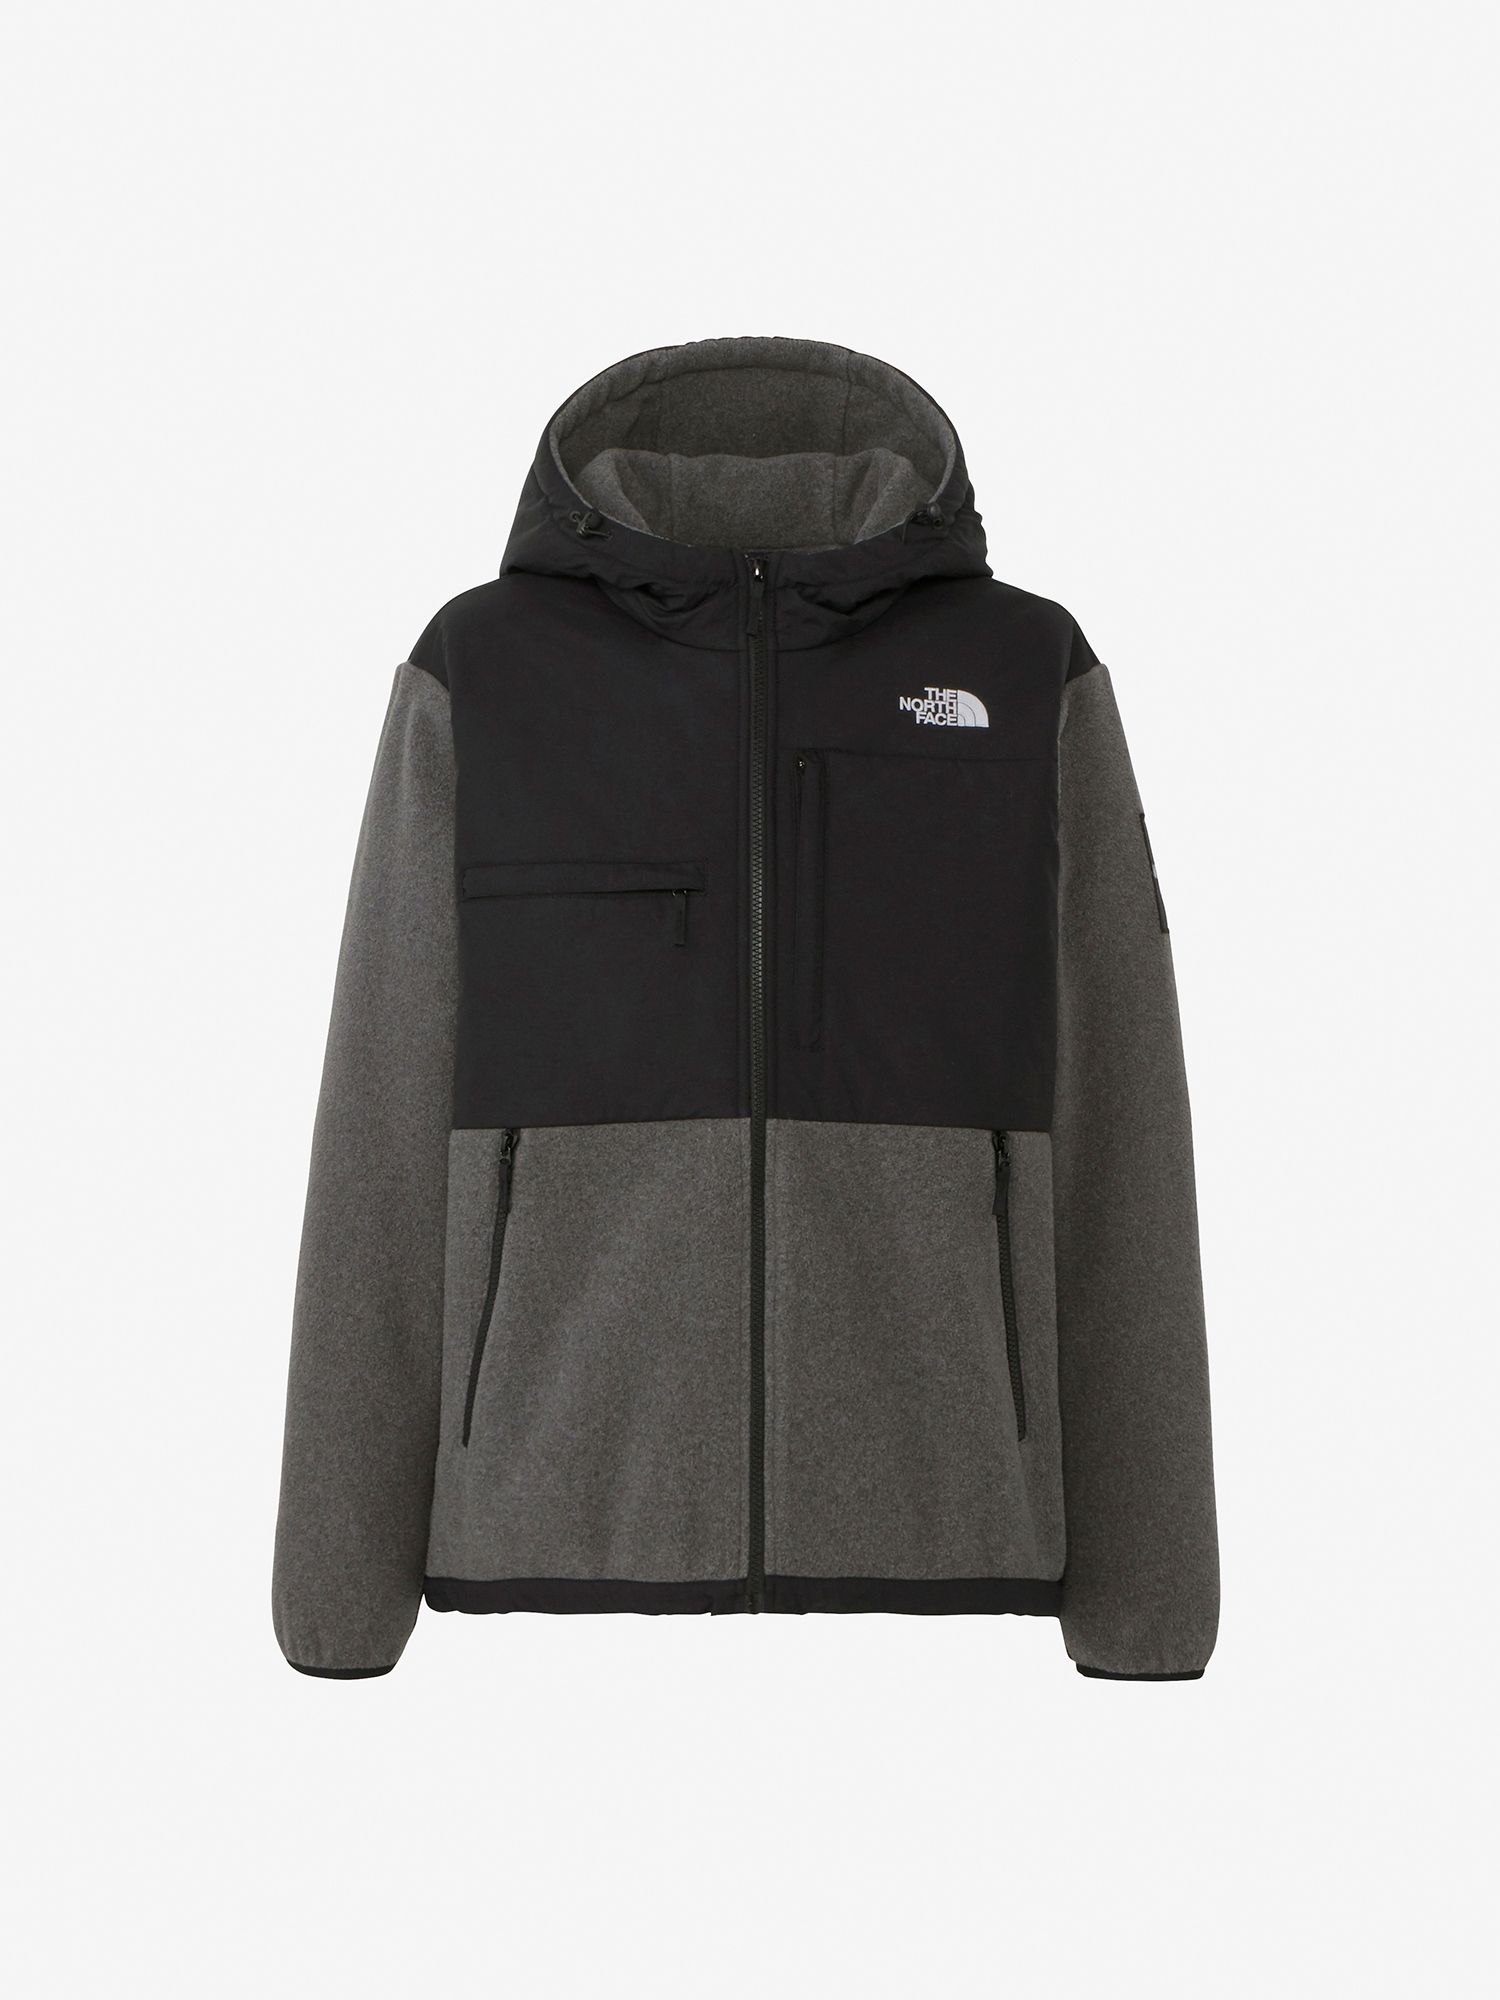 THE NORTH FACE デナリフーディー